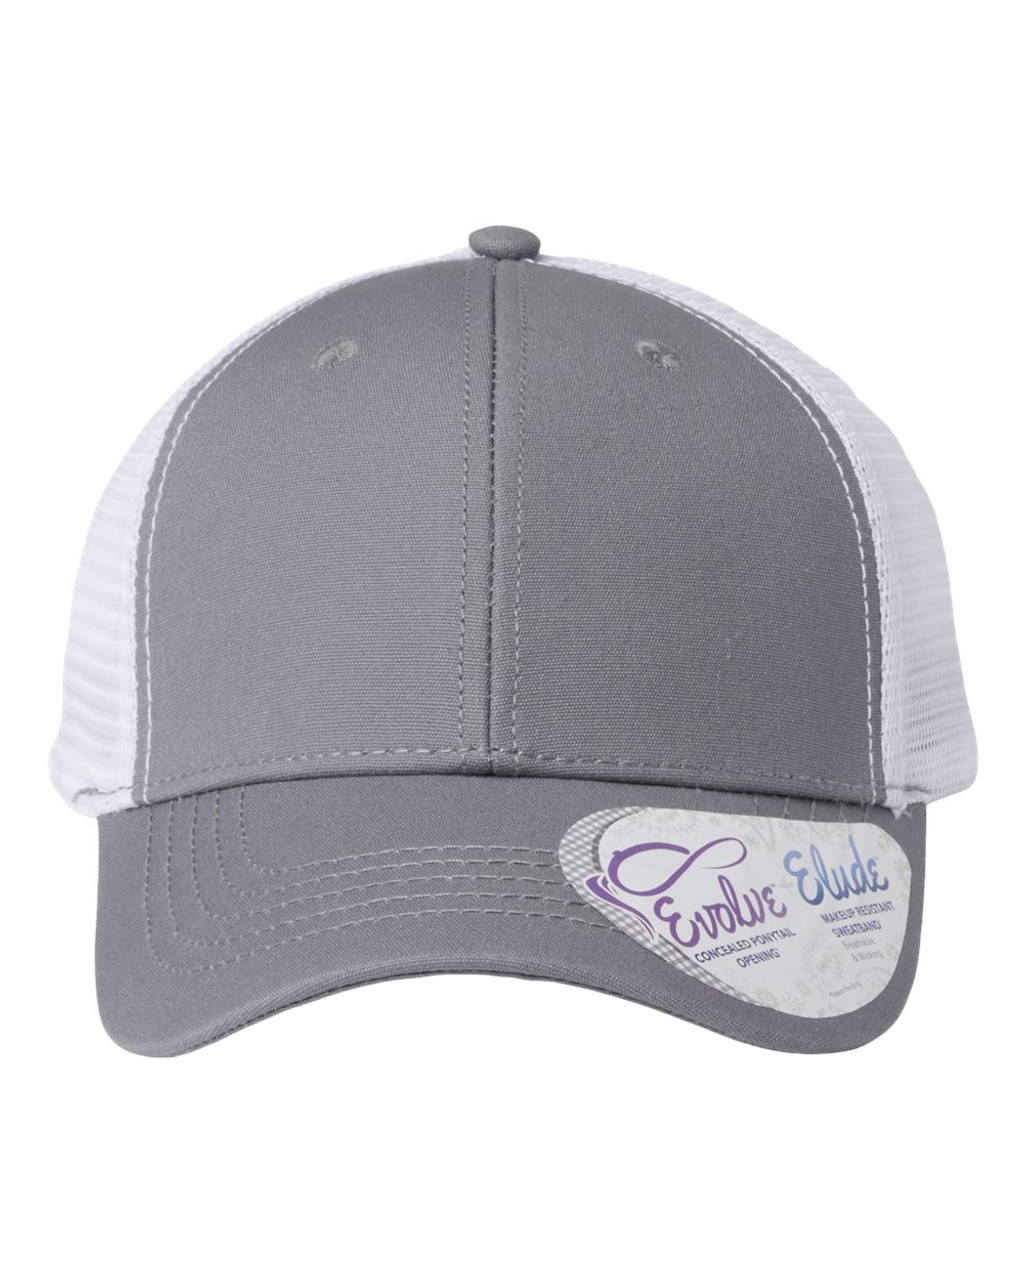 Inifnity Her Charlie 97395 Grey/White